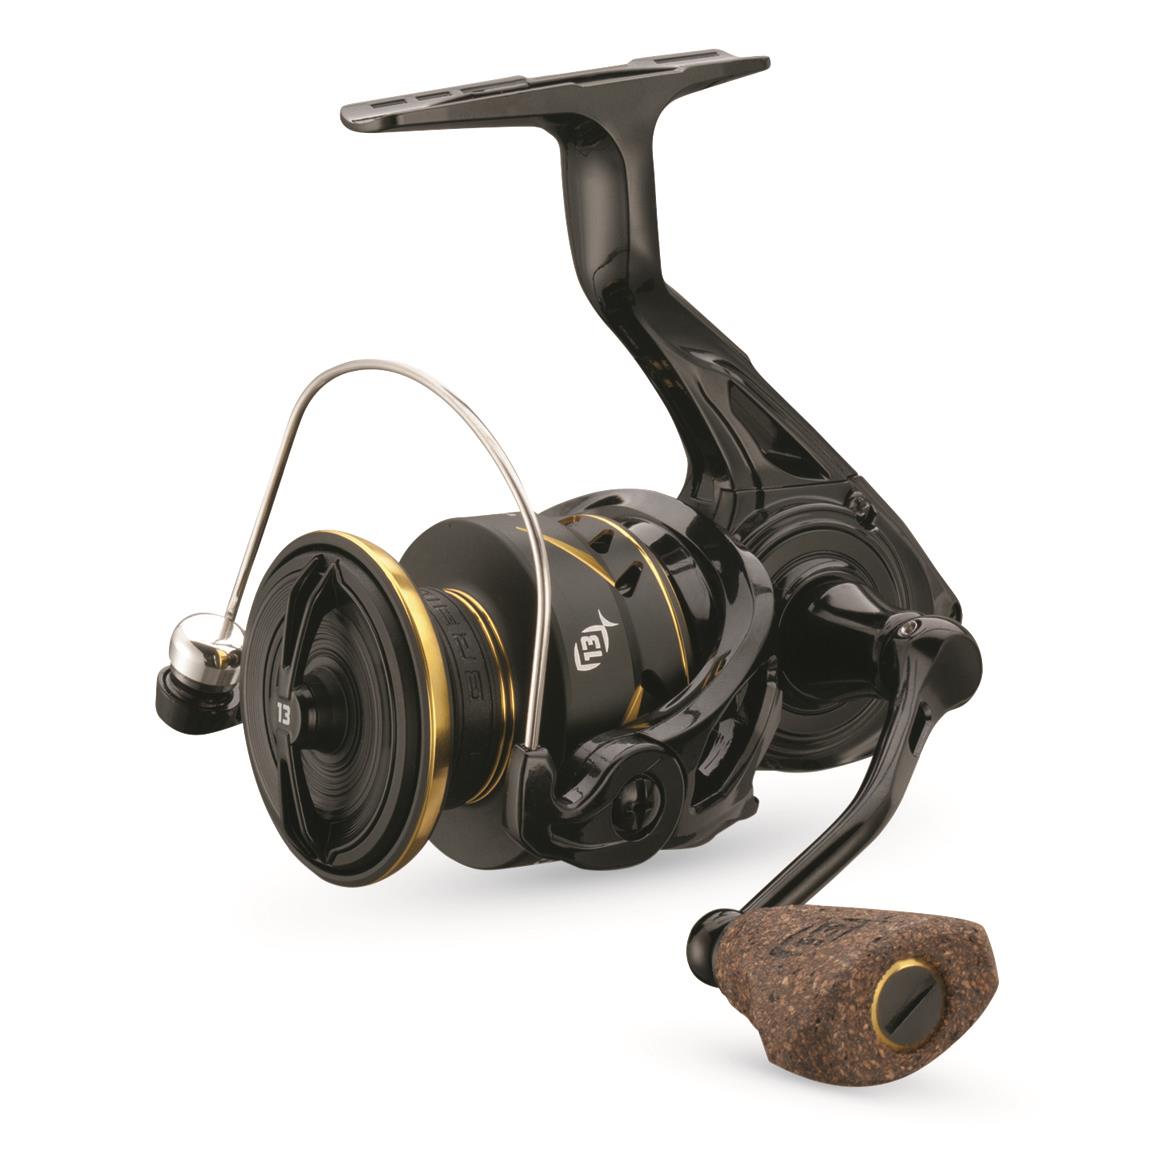 13 Fishing Aerios Spinning Reel, Size 1000, 6.2:1 Gear Ratio - 729842, Spinning  Reels at Sportsman's Guide